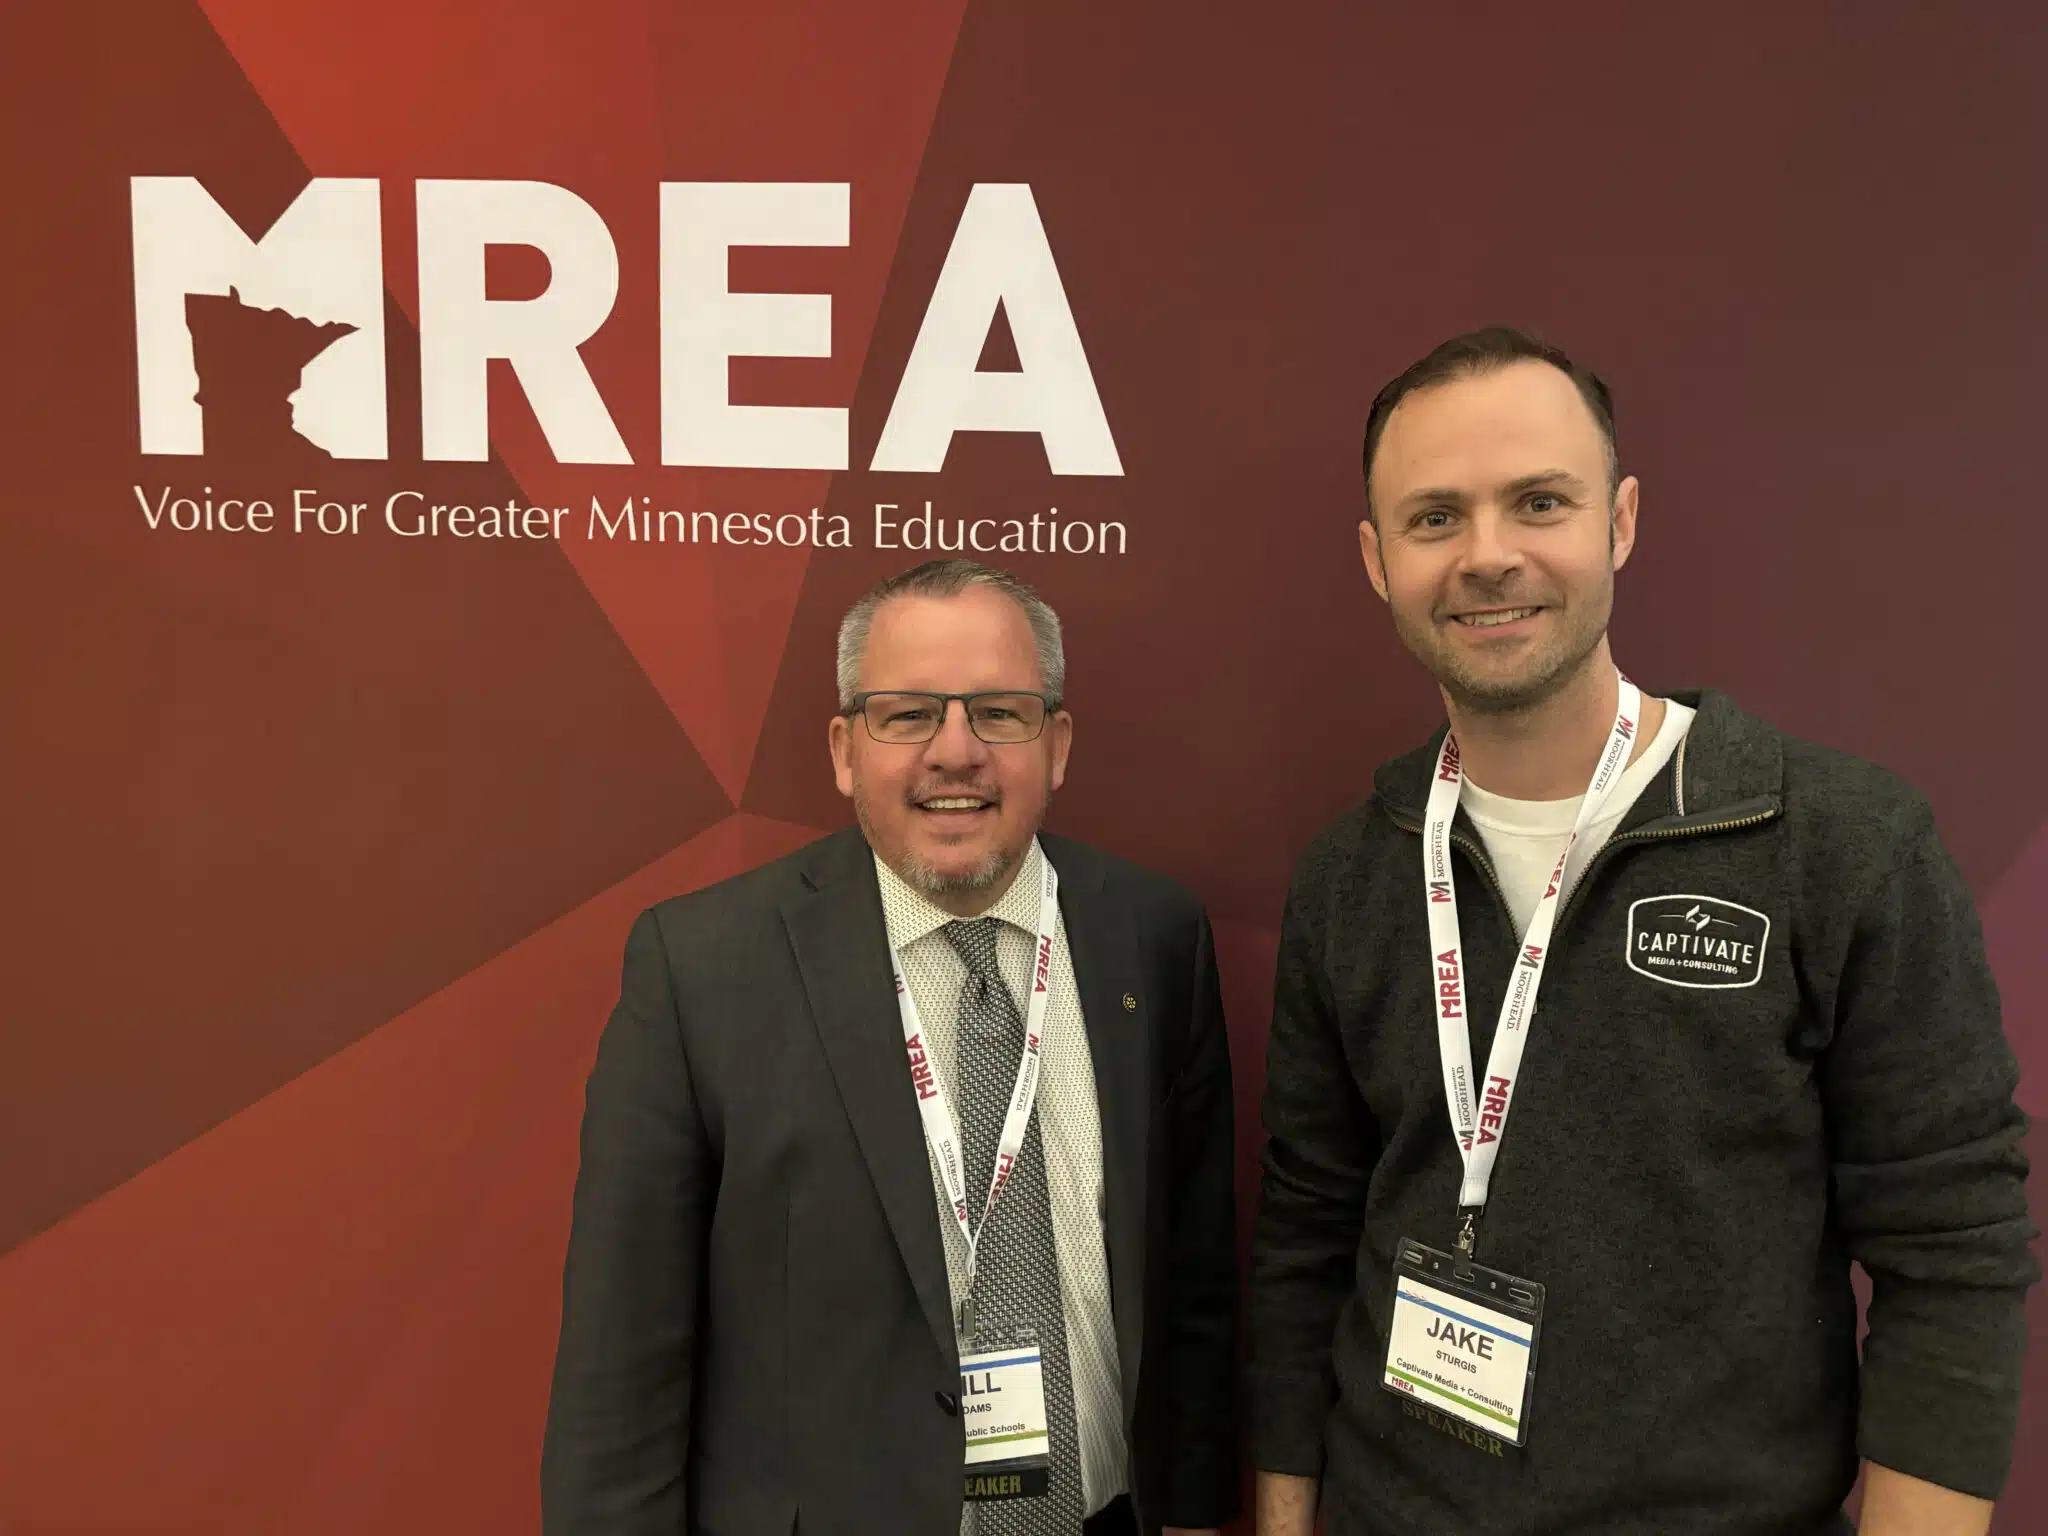 Dr. Bill Adams (Left) and Jake Sturgis (right) in front of an MREA banner